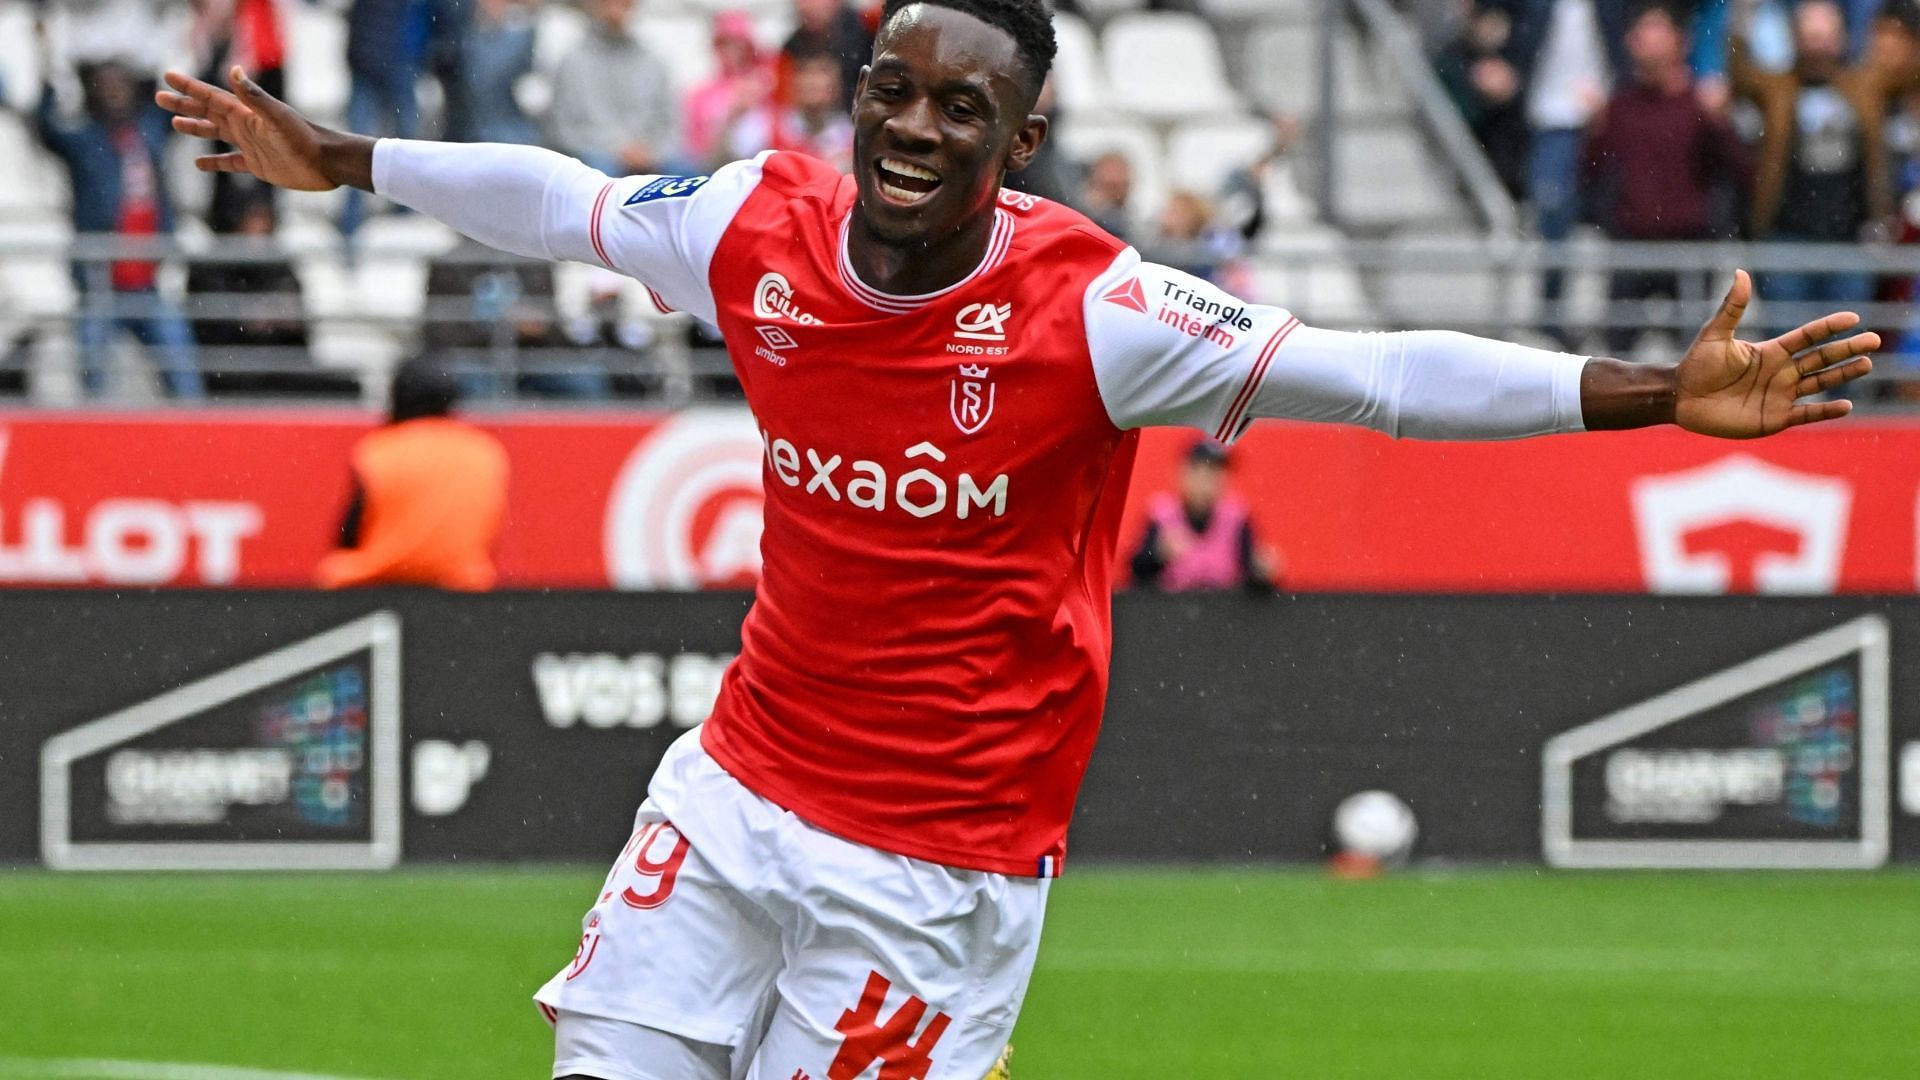 Folarin Balogun will be hoping to score his eighth goal for Reims this weekend when his side face Brest